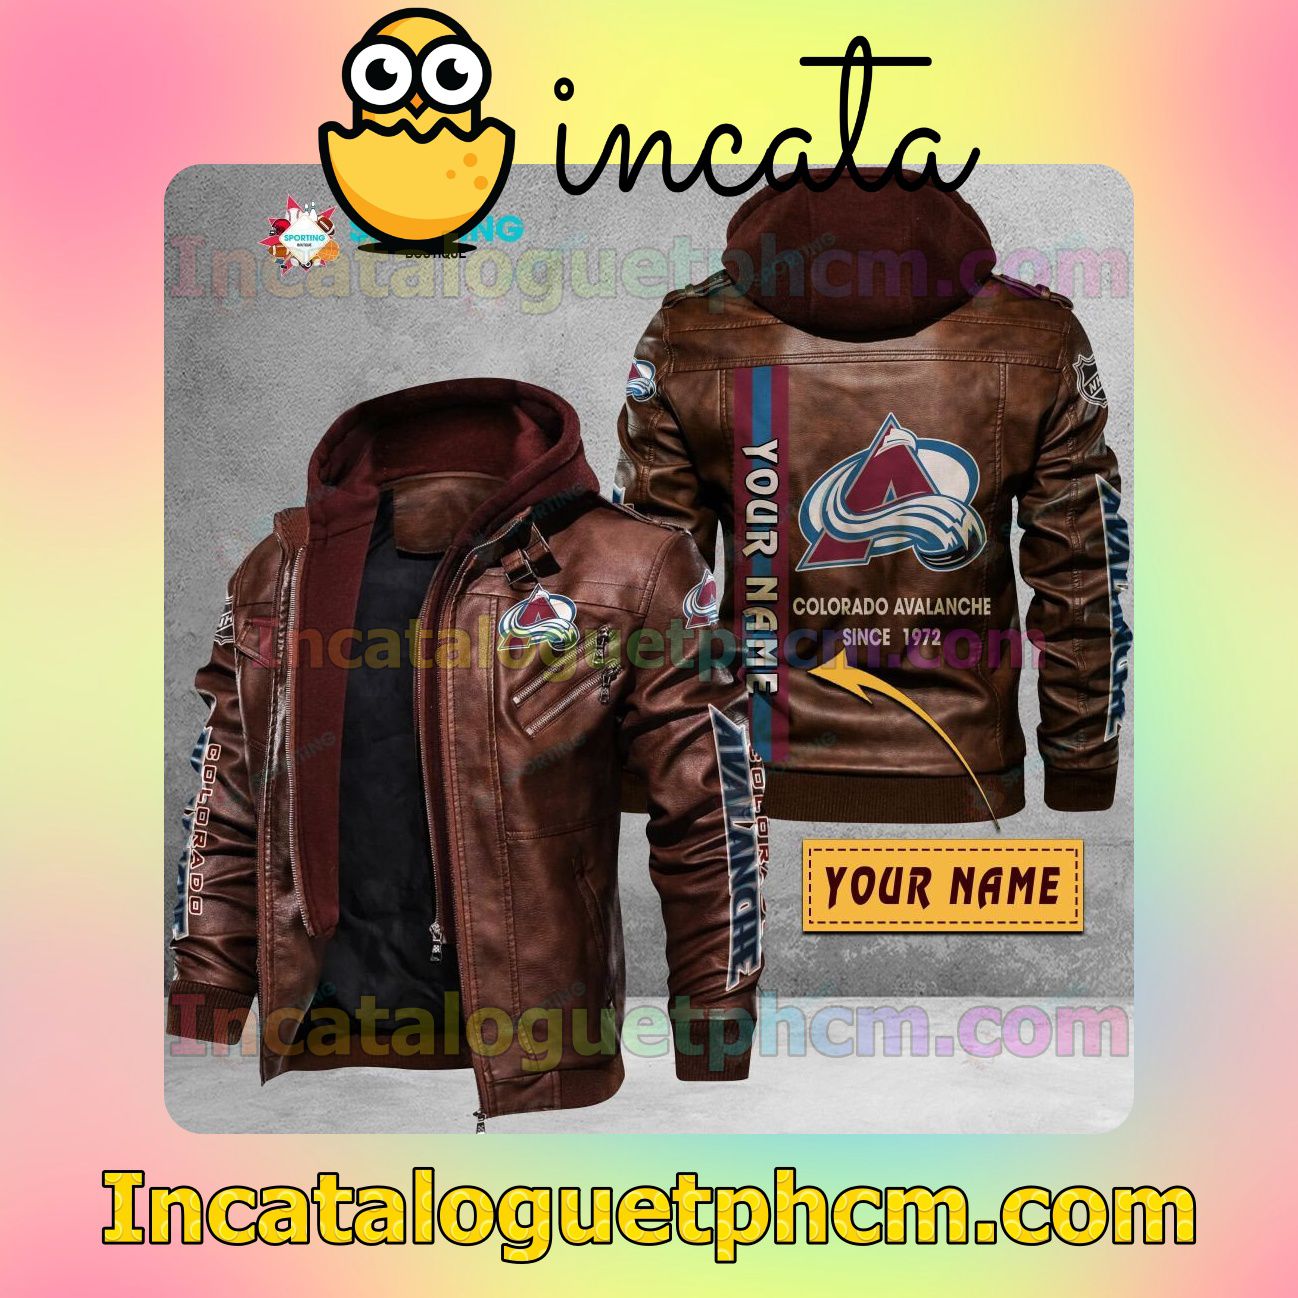 Check out Colorado Avalanche Customize Brand Uniform Leather Jacket